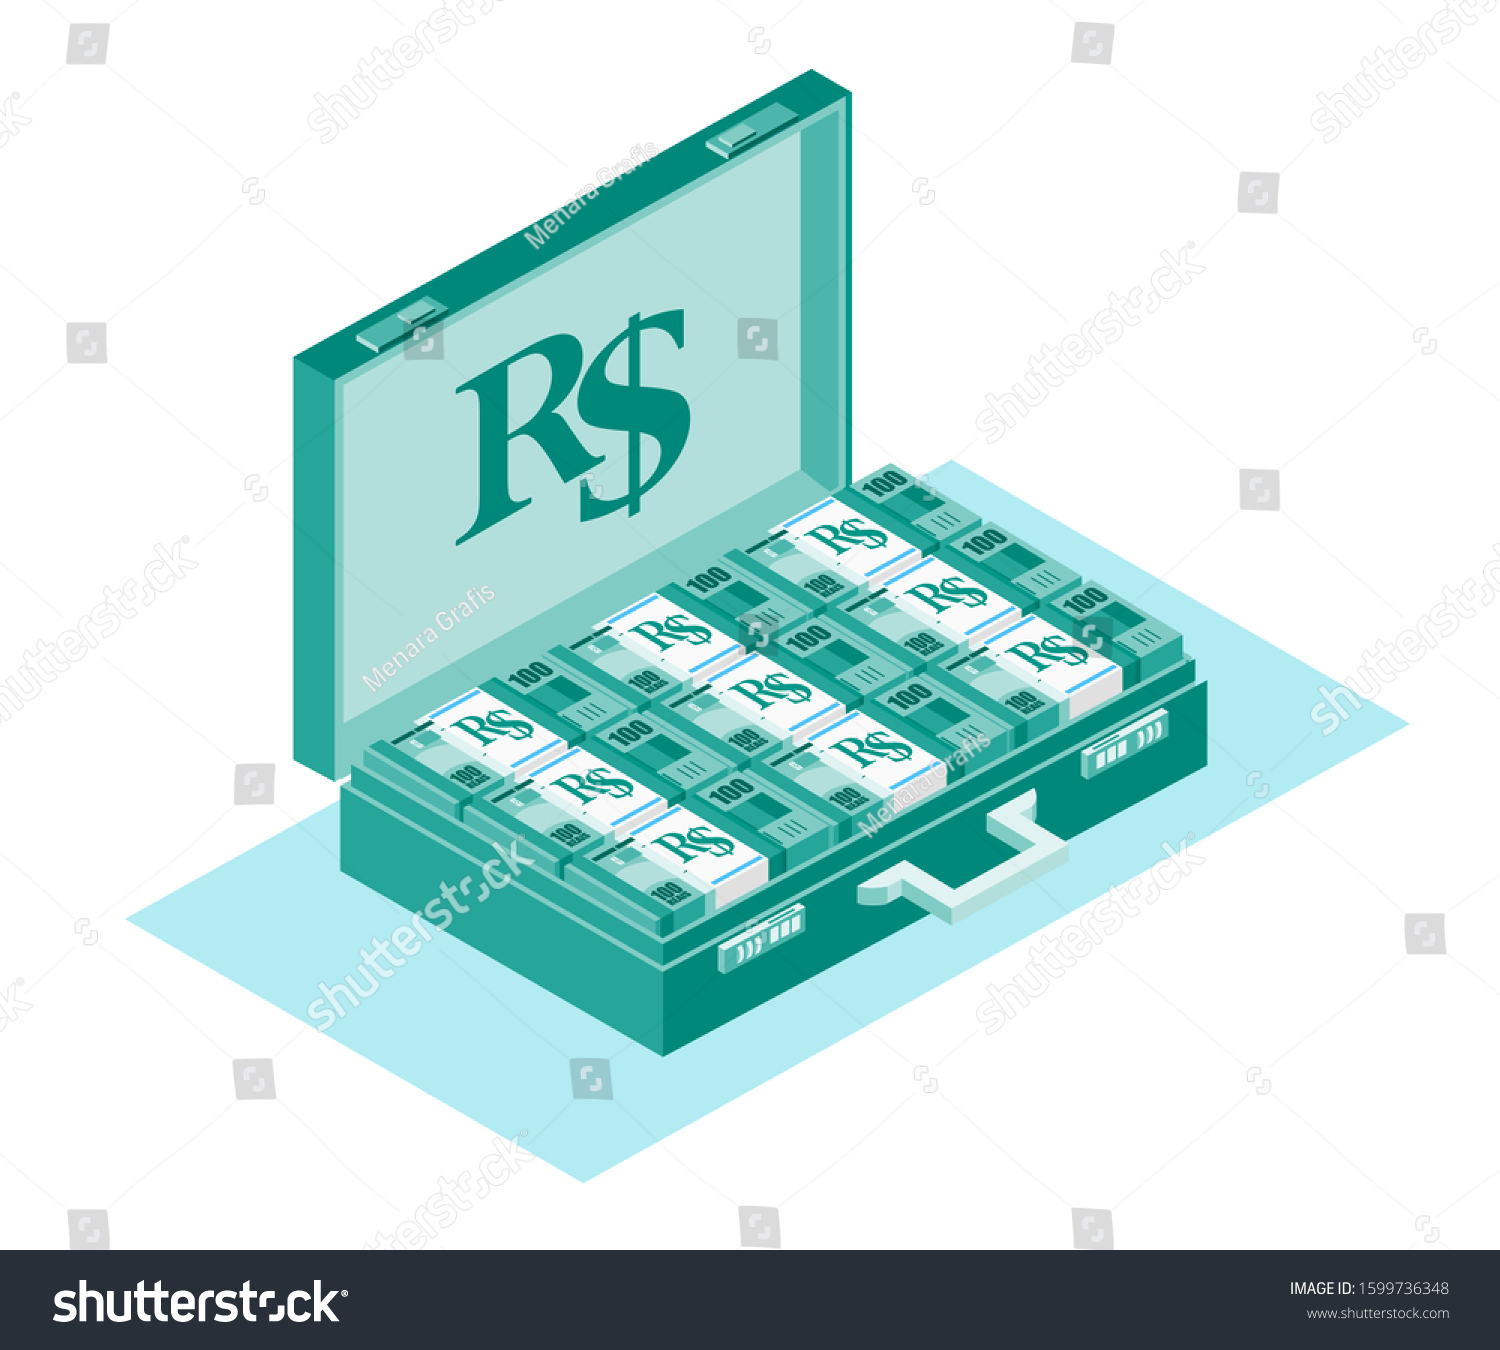 SVG of Bundle of Brazilian Real BRL Money inside opened case box vector icon logo illustration and design. Brazil currency, business, payment and finance element. Can be used for digital usage and print svg